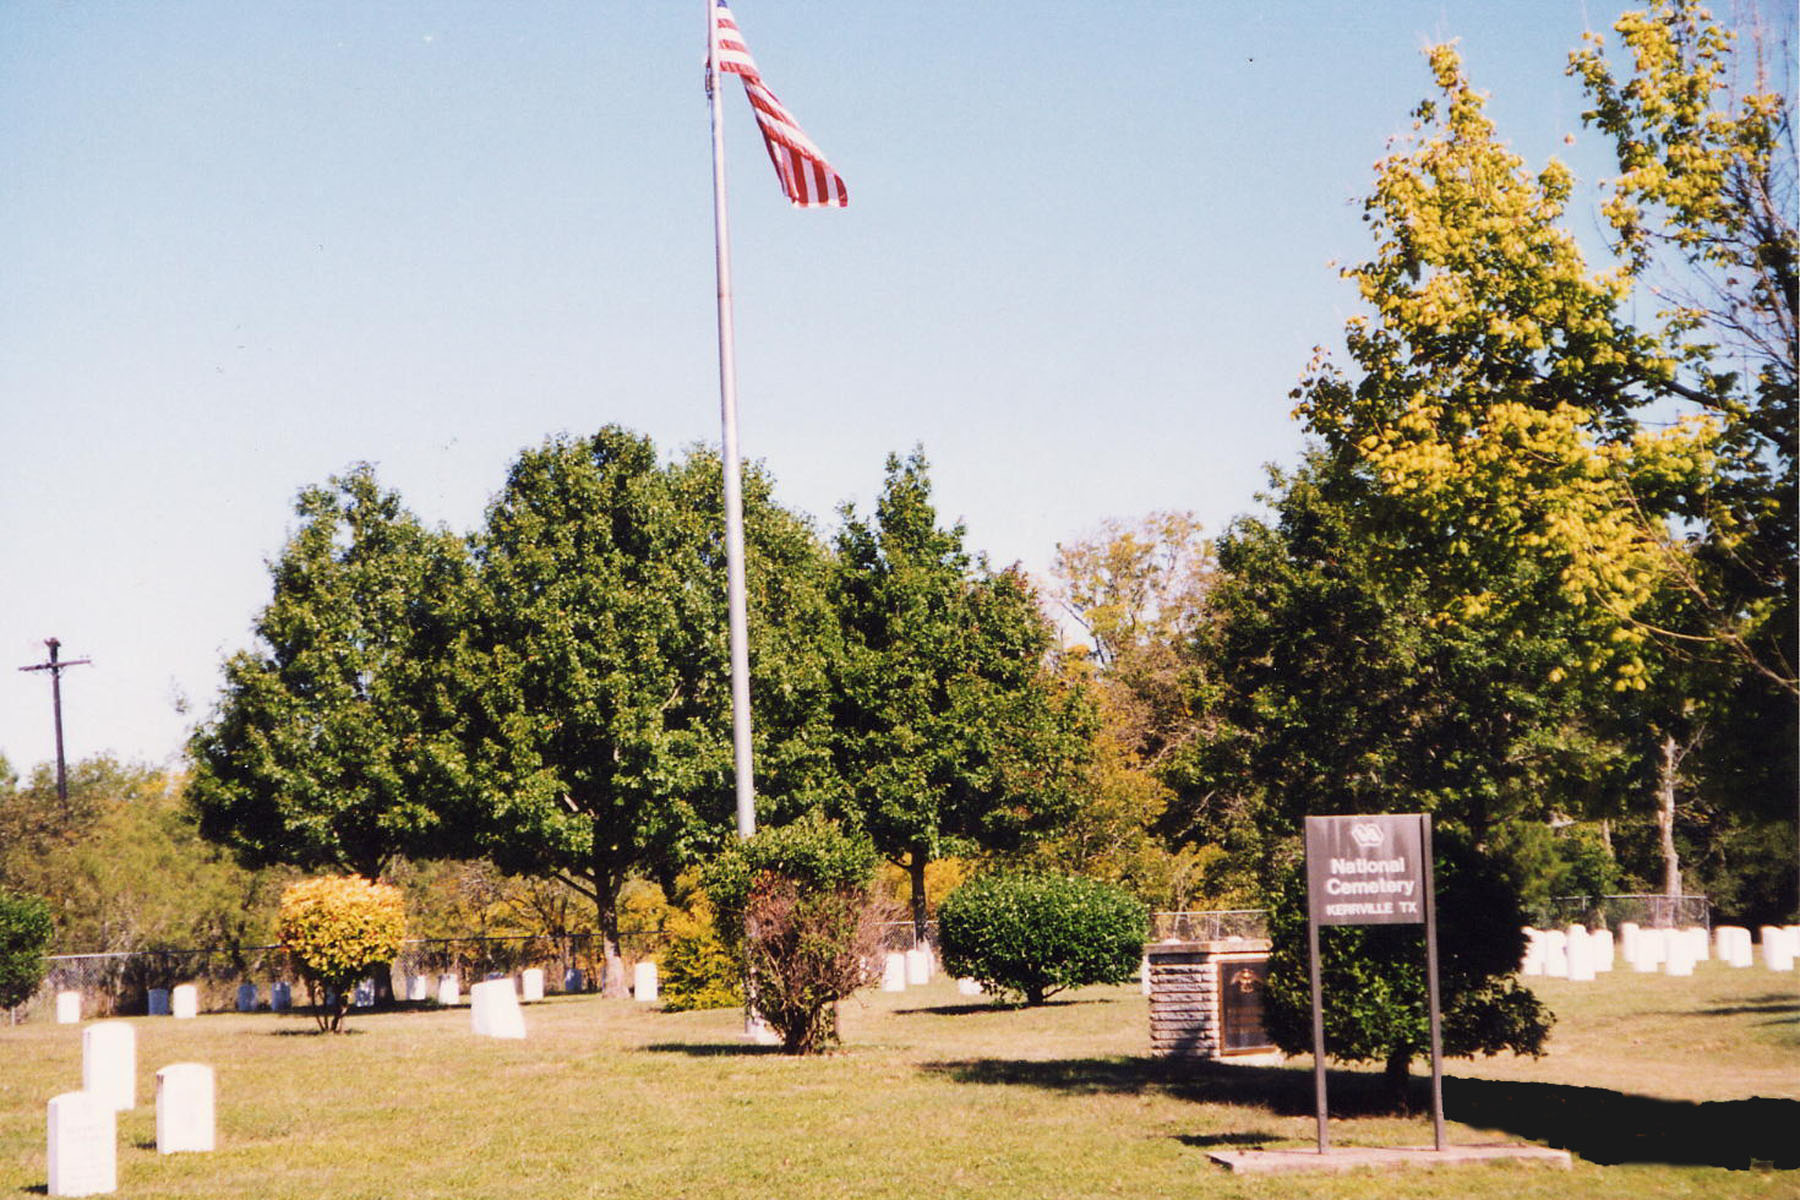 A photo of the American flag flying high in the center of the cemetery among bushes and upright markers sprinkled throughout the grounds.